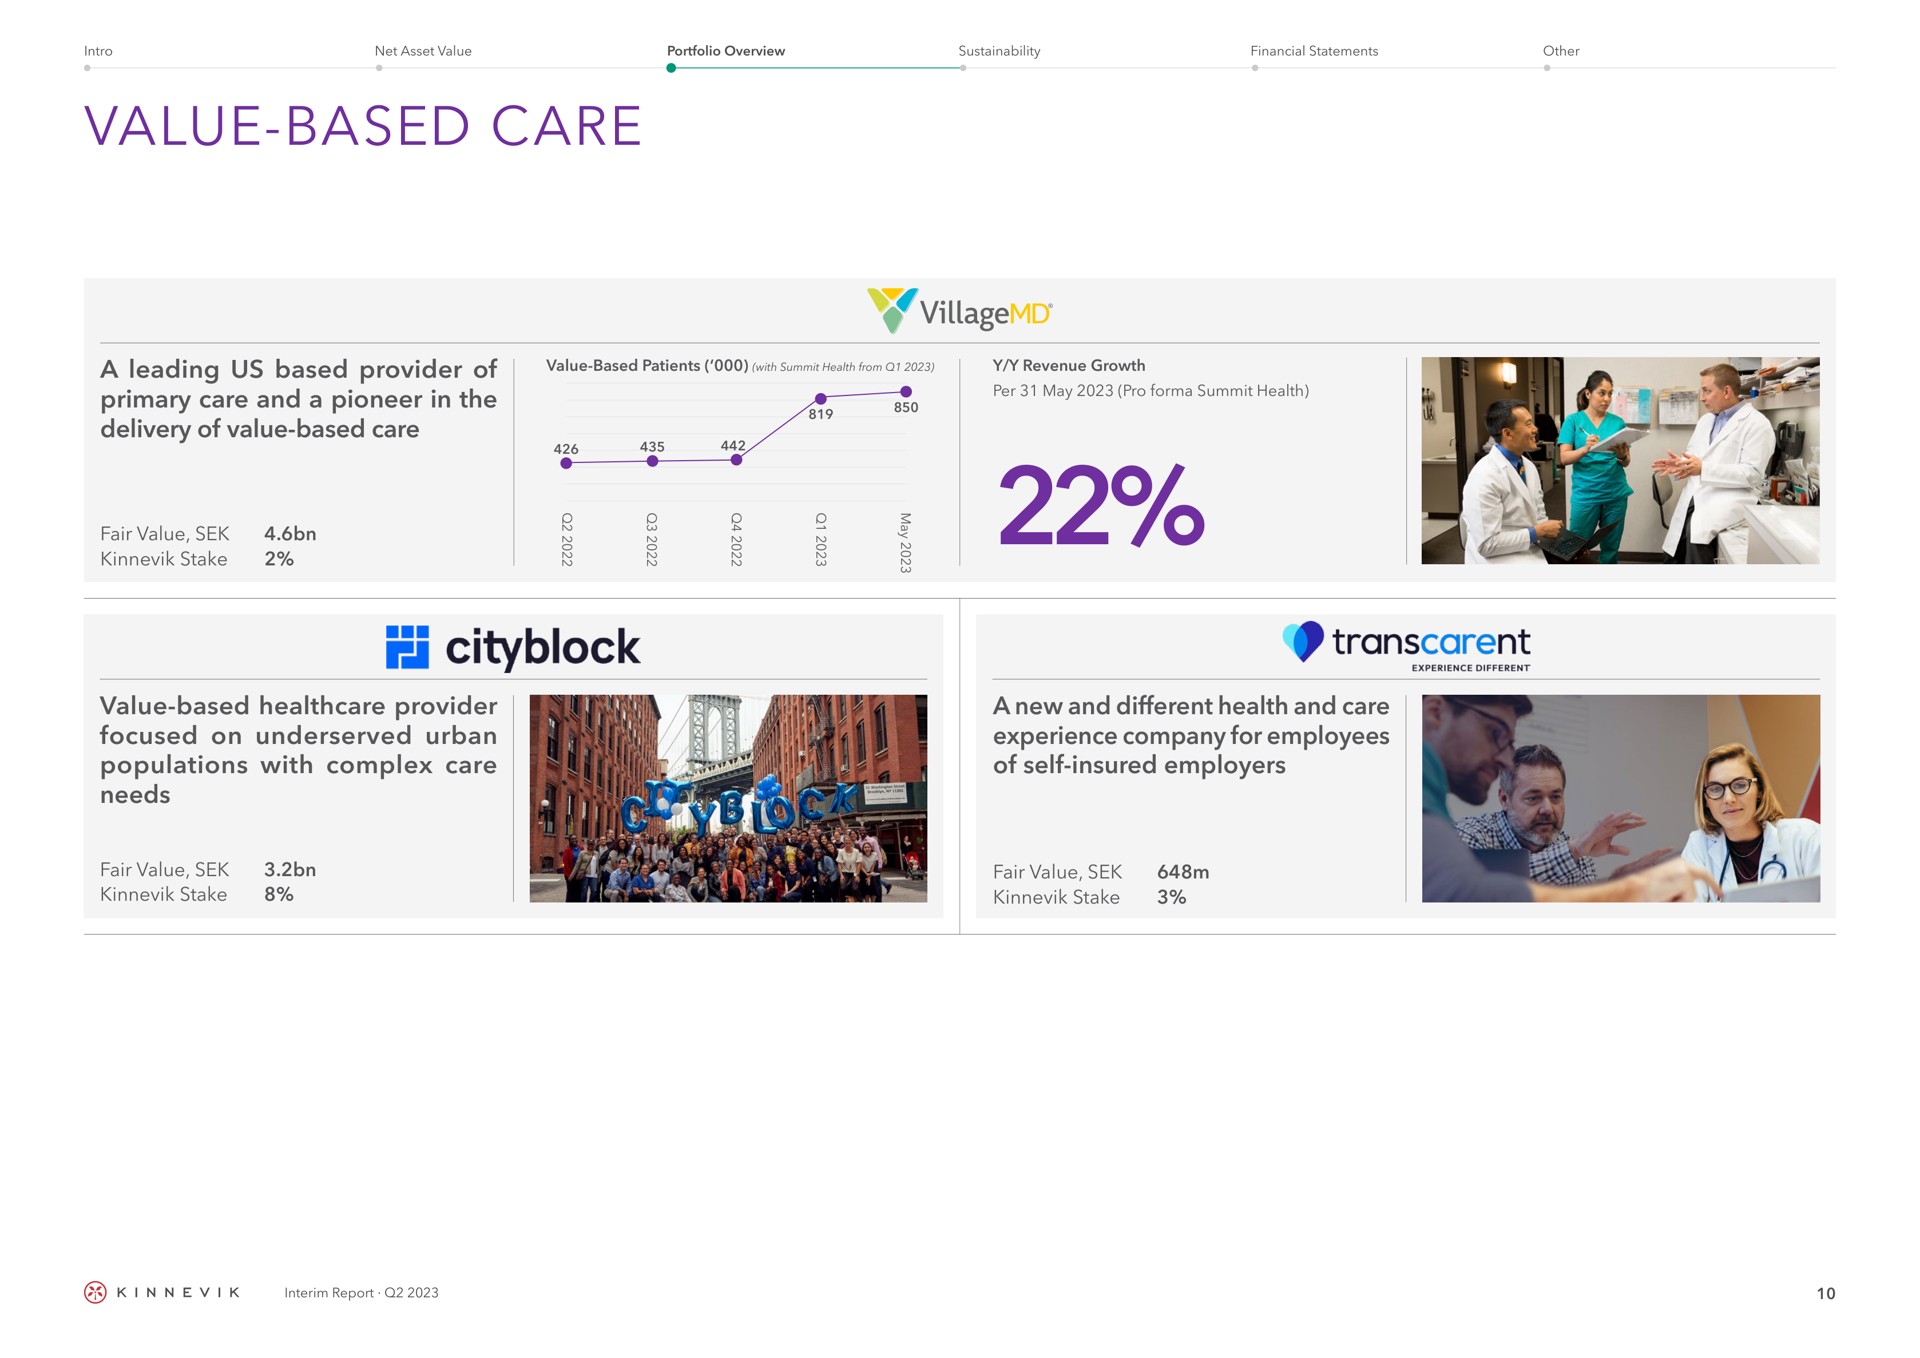 value based care a leading us based provider of primary care and a pioneer in the delivery of value based care value based provider focused on urban populations with complex care needs a new and different health and care experience company for employees of self insured employers village anew | Kinnevik